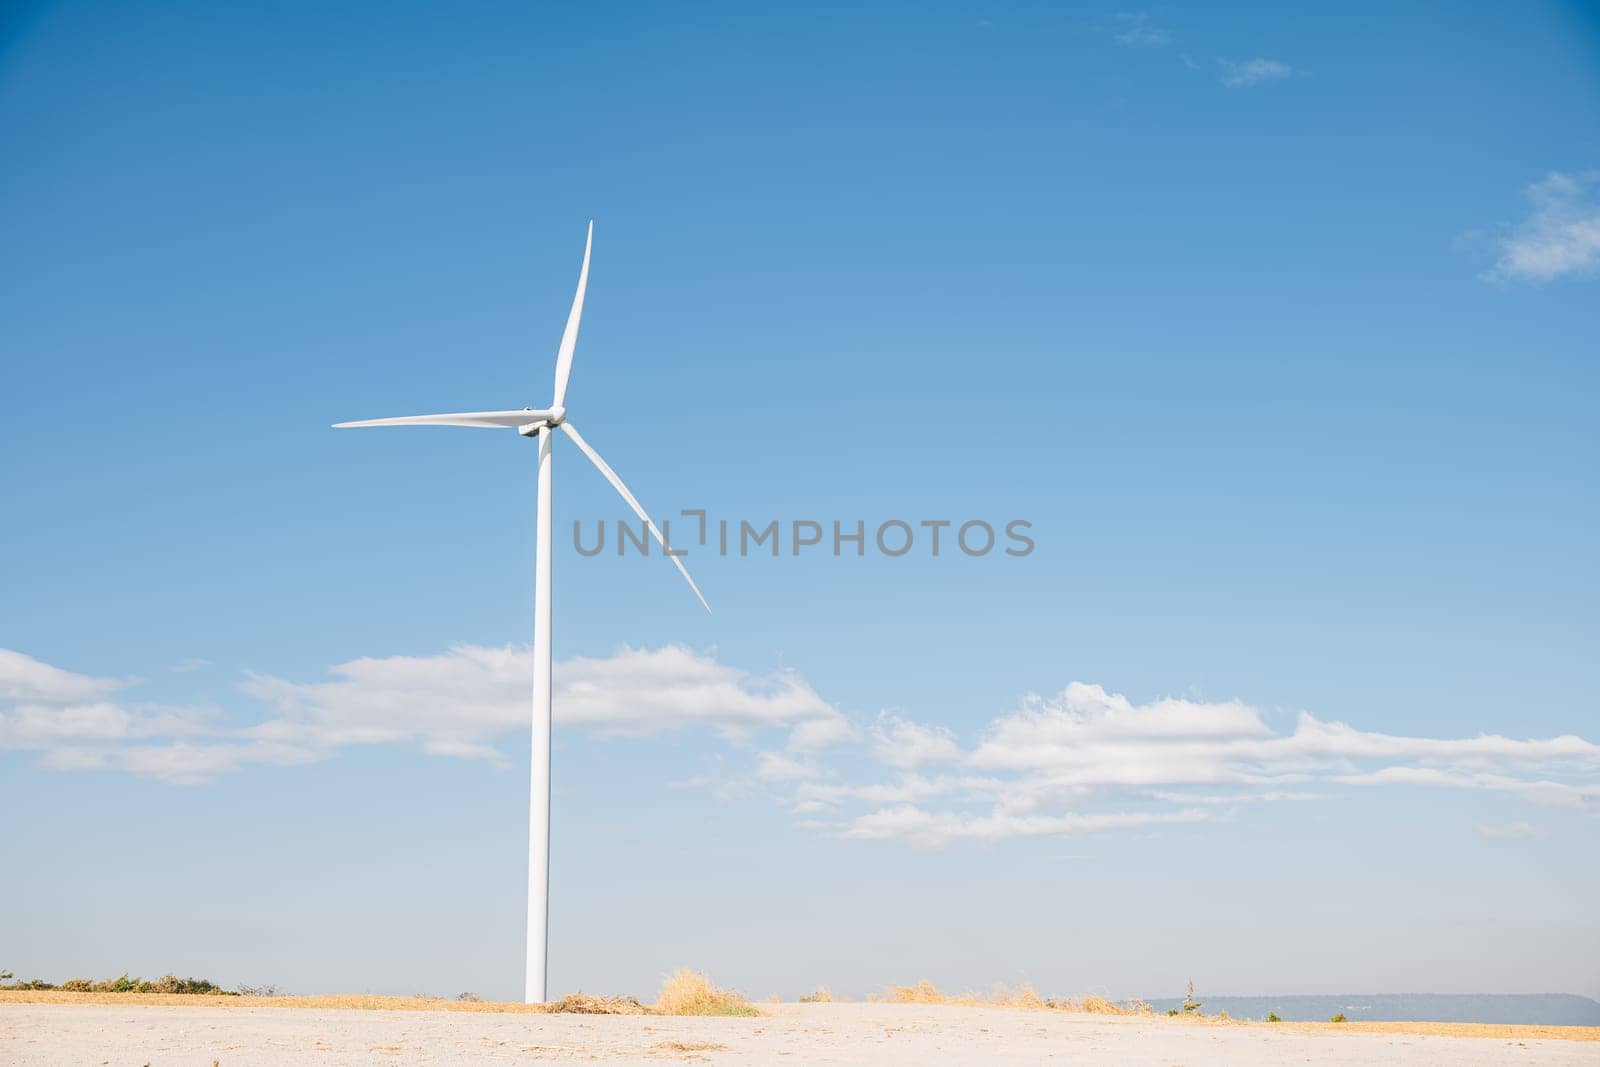 On a mountain windmill farm turbines harness nature's wind for clean energy. Modern innovation in wind technology drives sustainable development under the expansive blue sky.